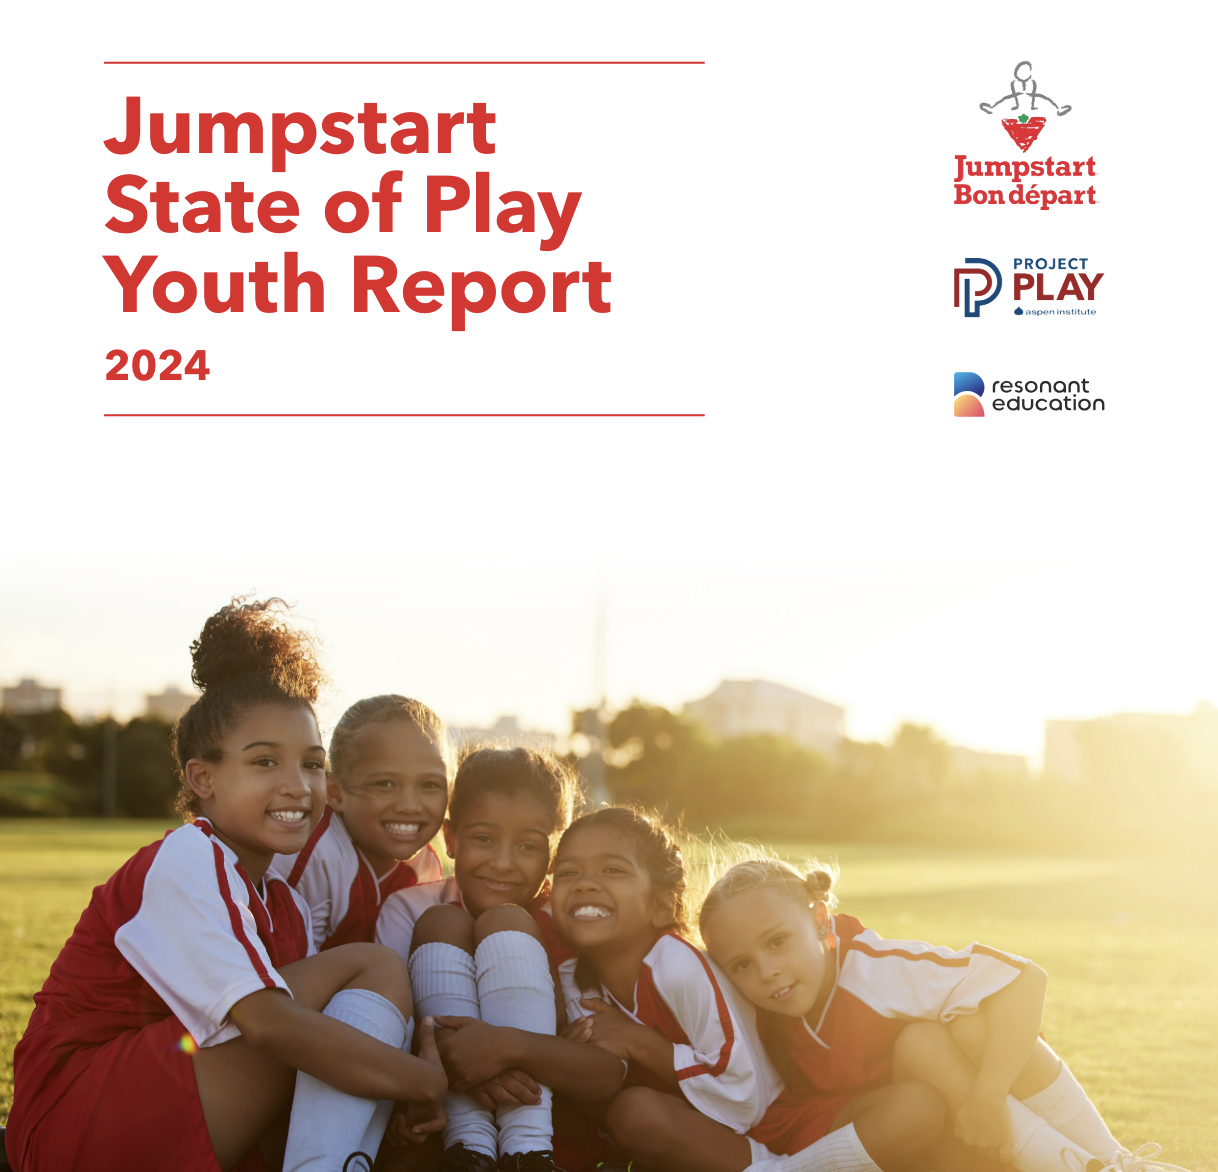   Jumpstart State of Play Youth Report  Comprehensive new report representing youth voices across Canada   READ THE REPORT  